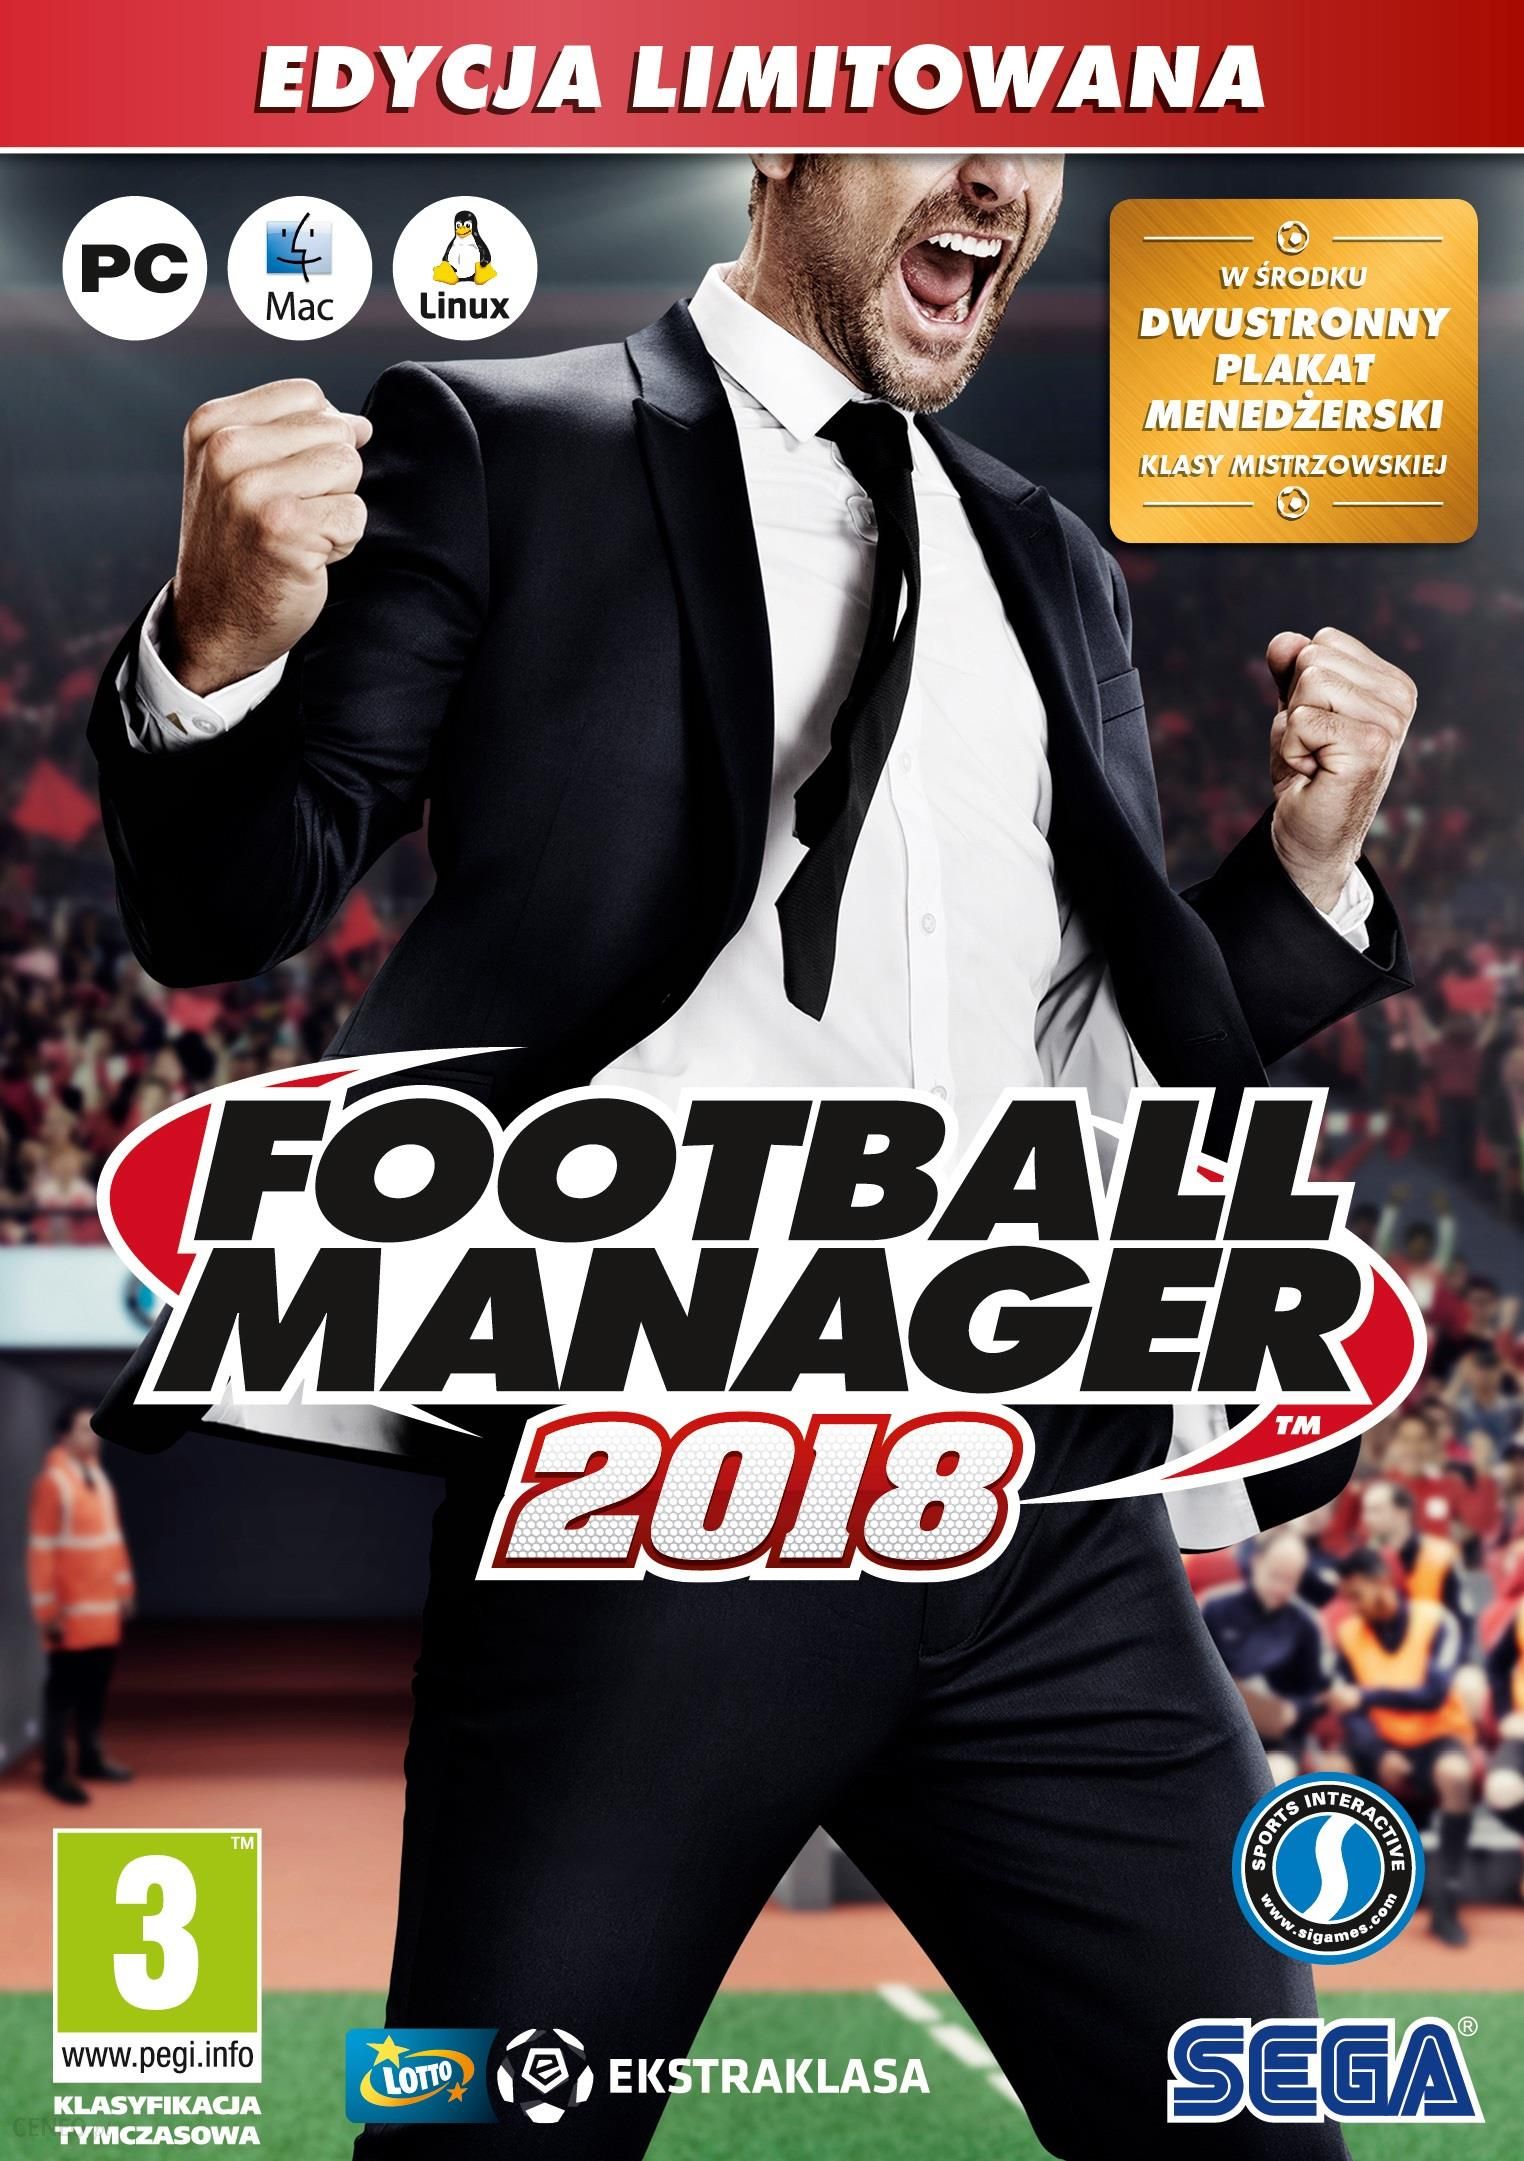 download real football manager 2018 for free